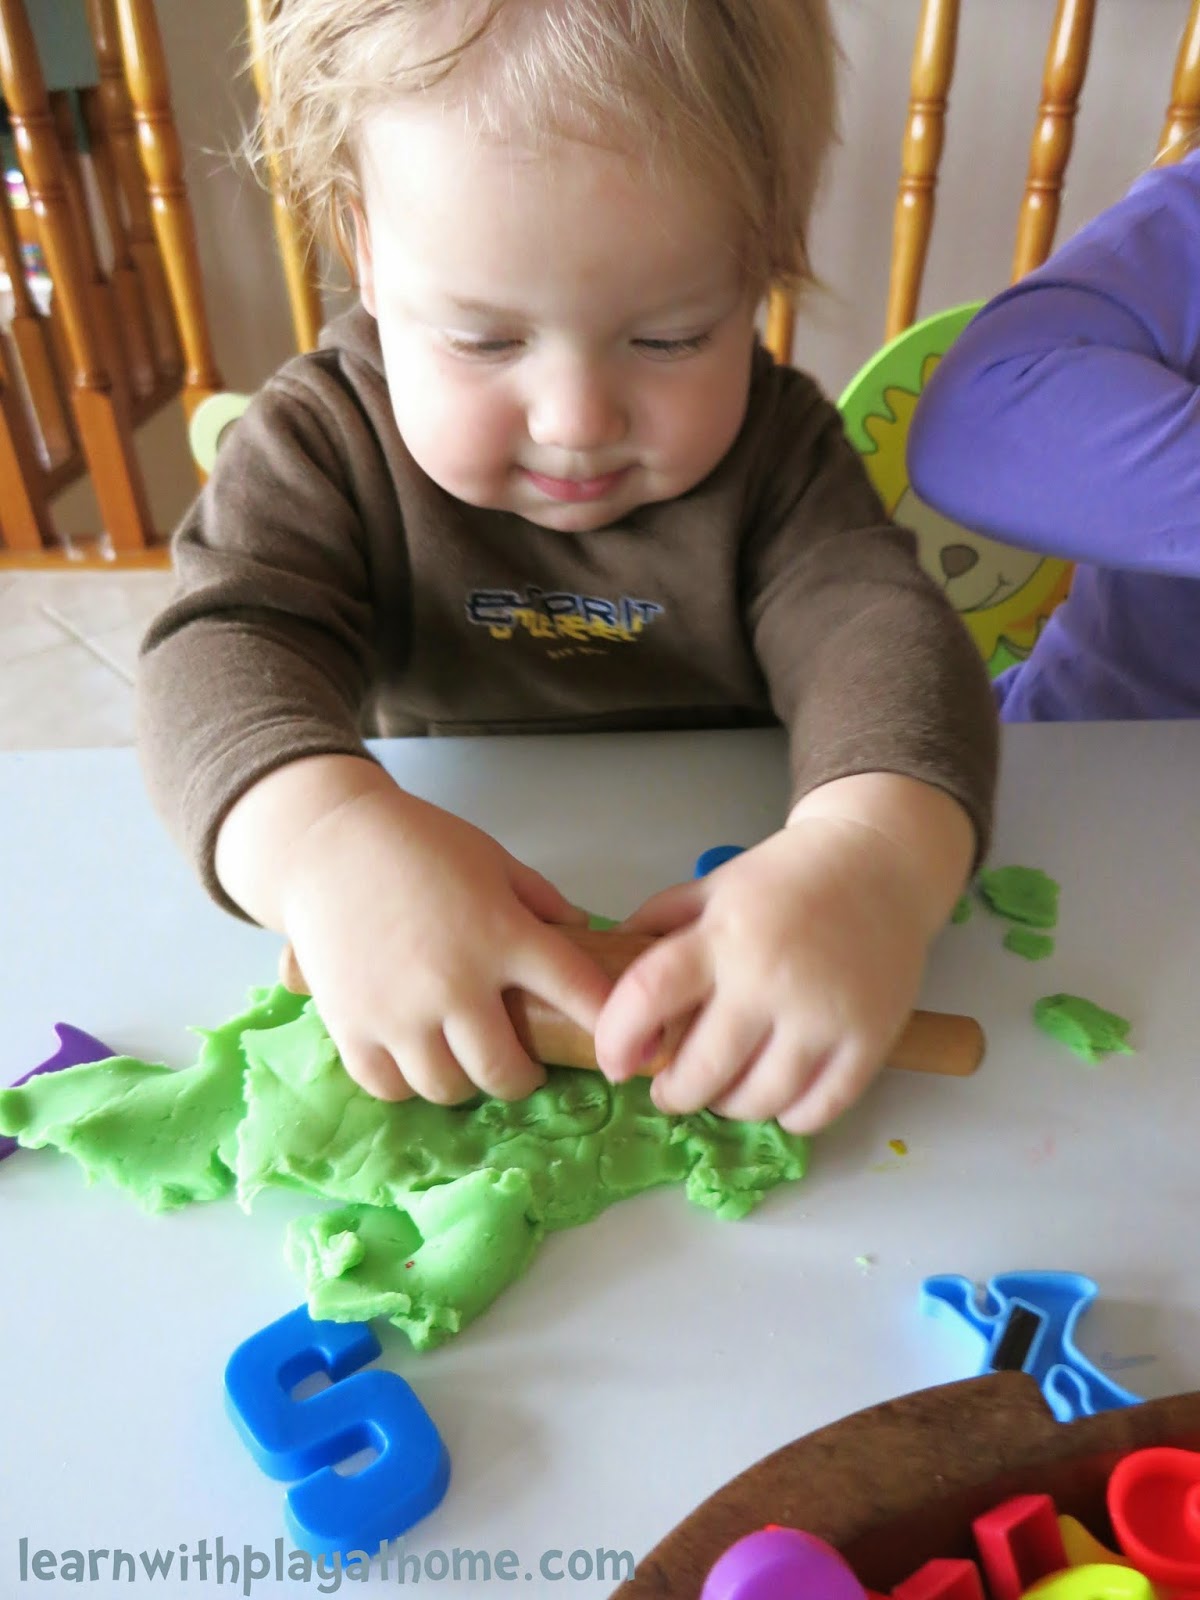 Learn with Play at Home: Invitation to Play and Learn with